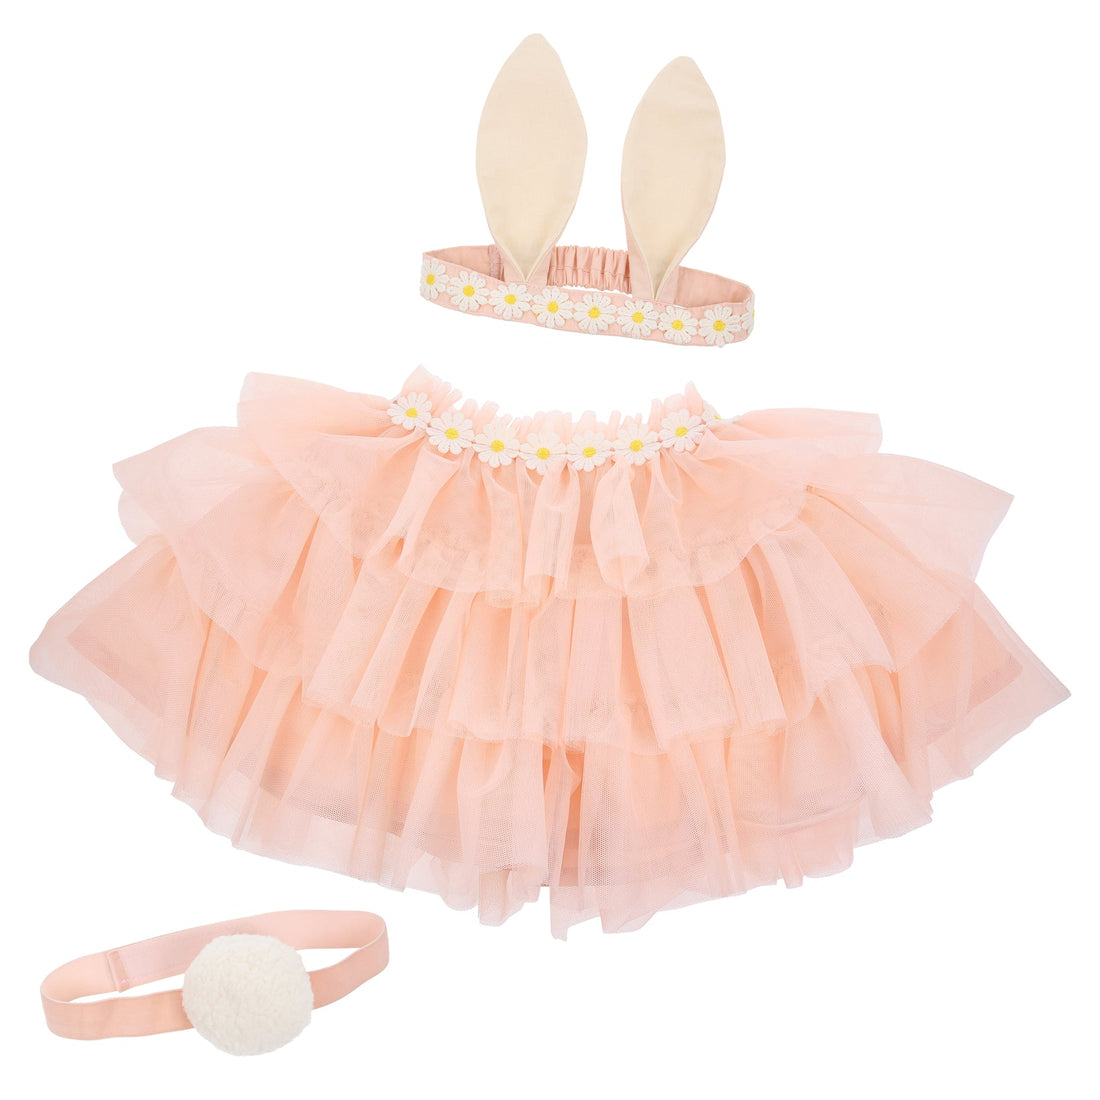 A Peach Tulle Bunny Costume with ears, perfect for Easter or Spring from Meri Meri.